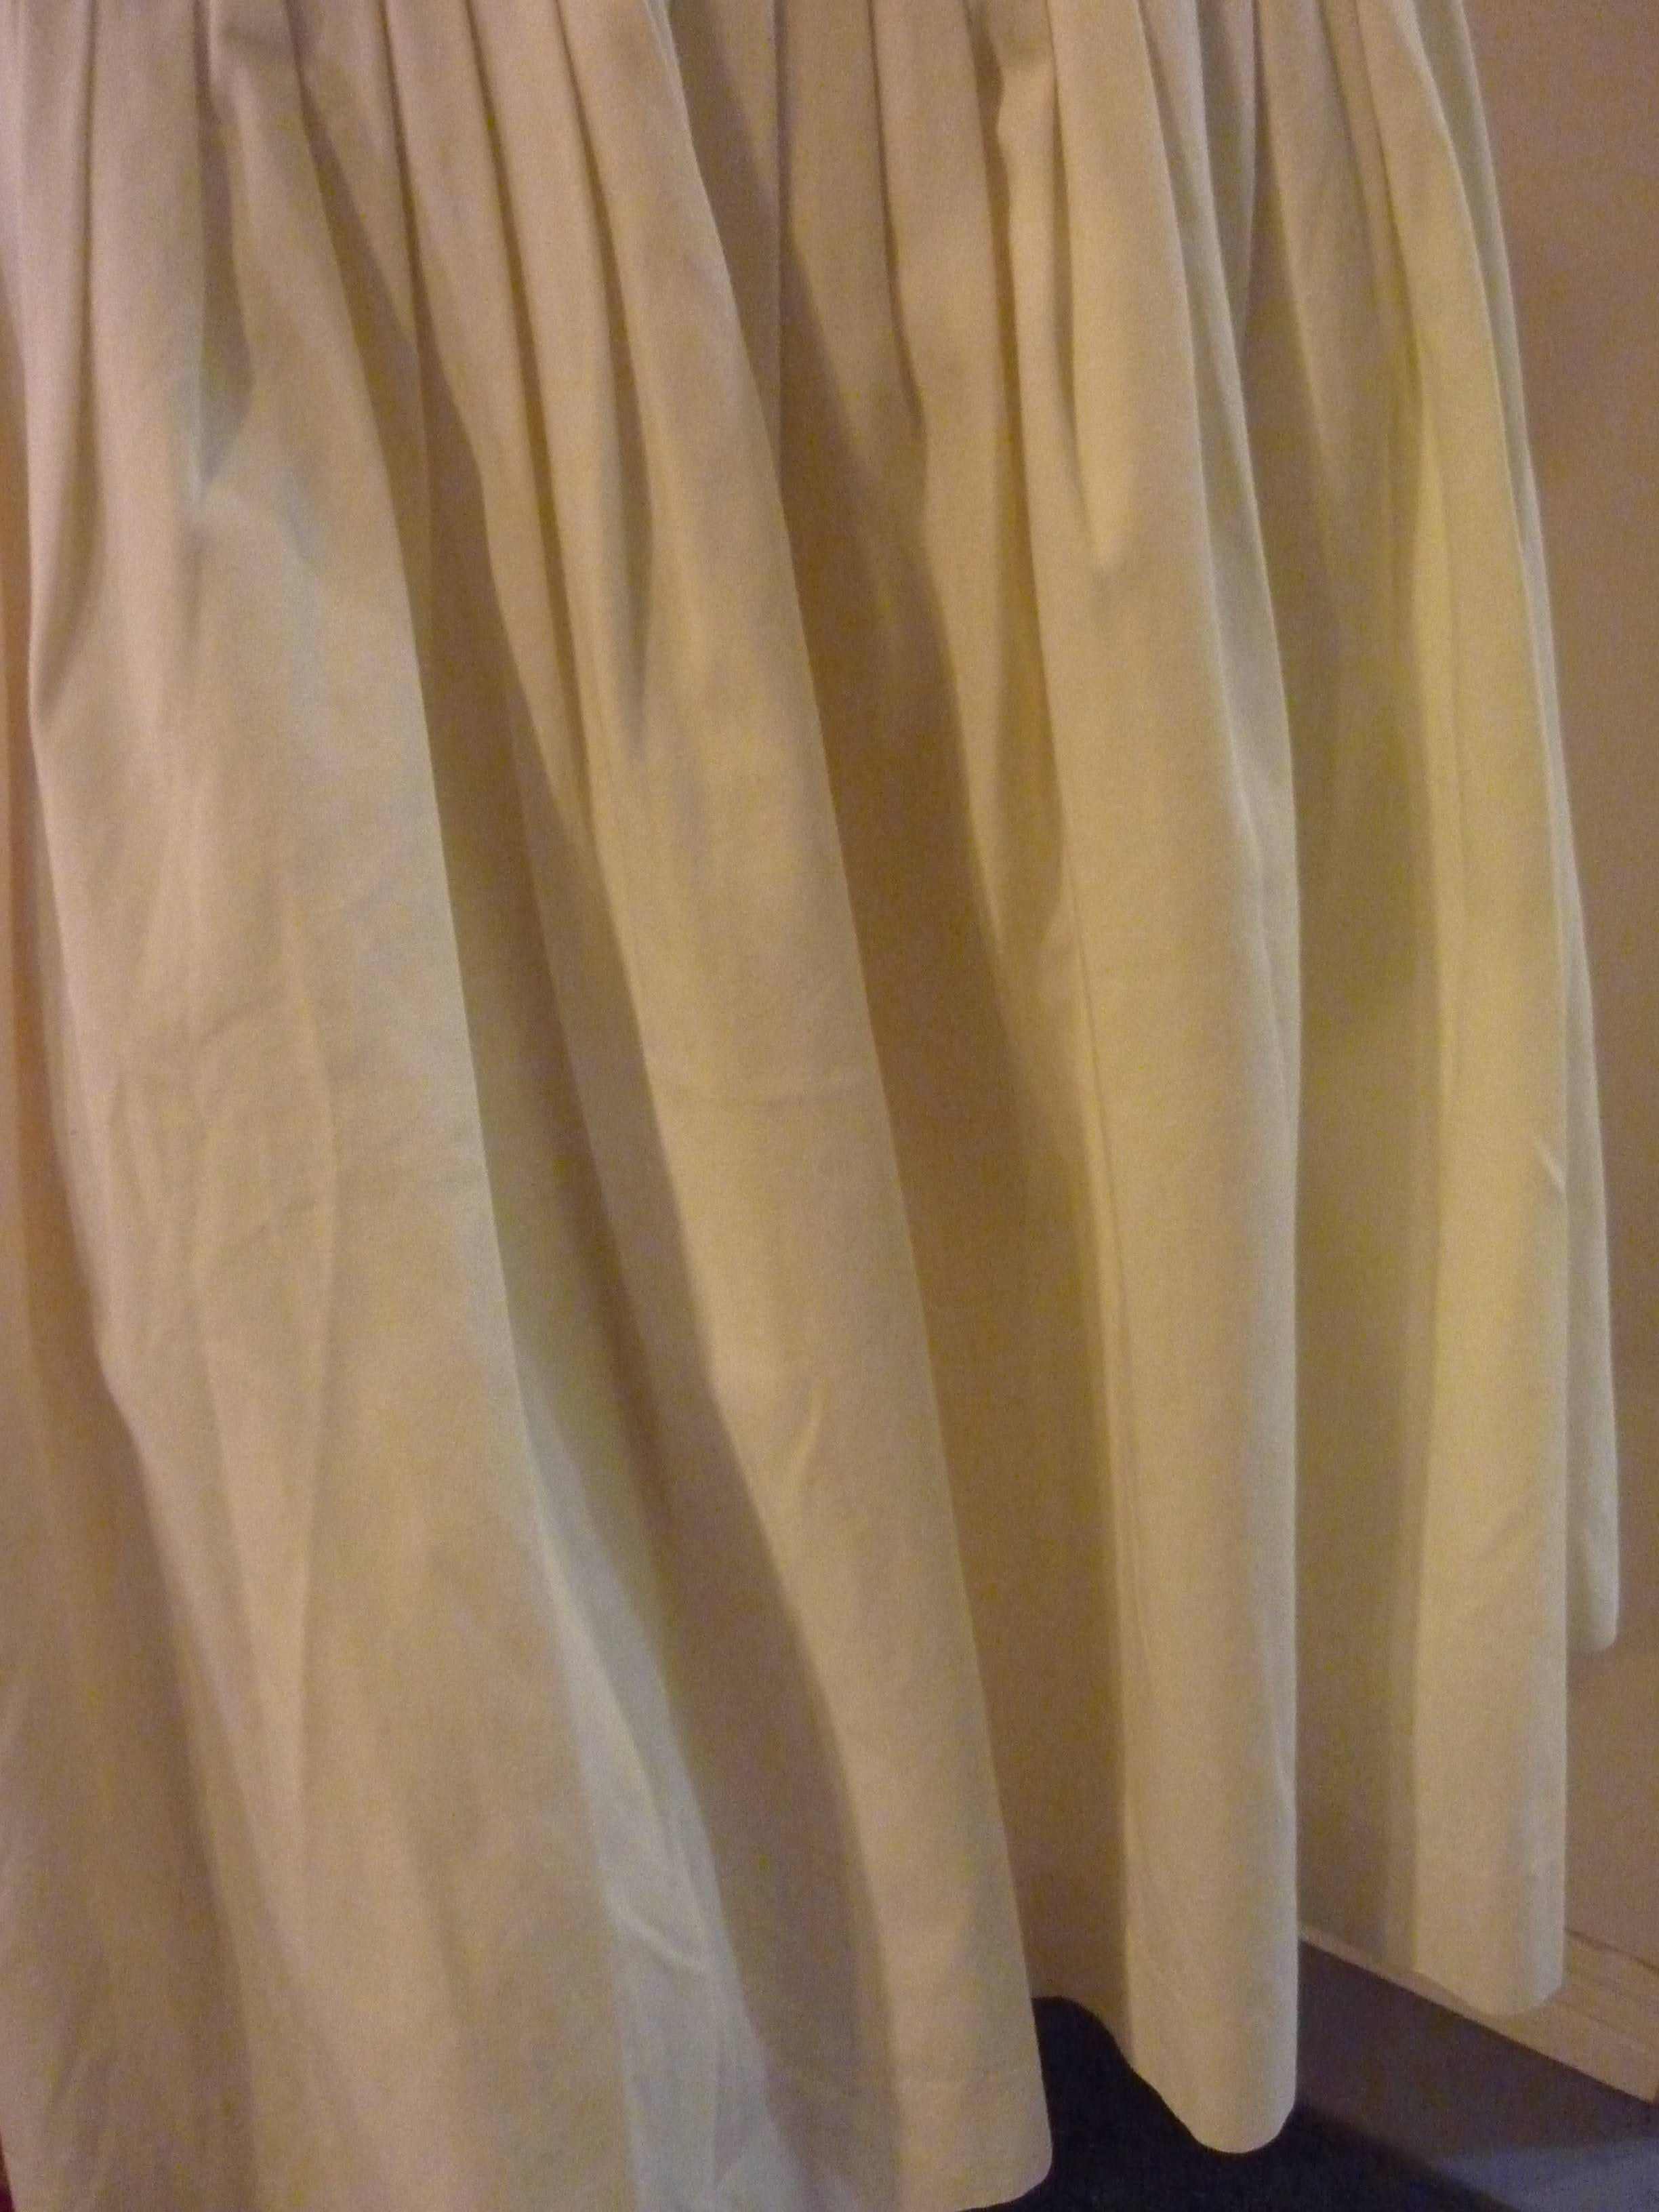 Perfect cream colored skirt with stitched pleats at the top, and side zipper closure.

In great conditions for its age.